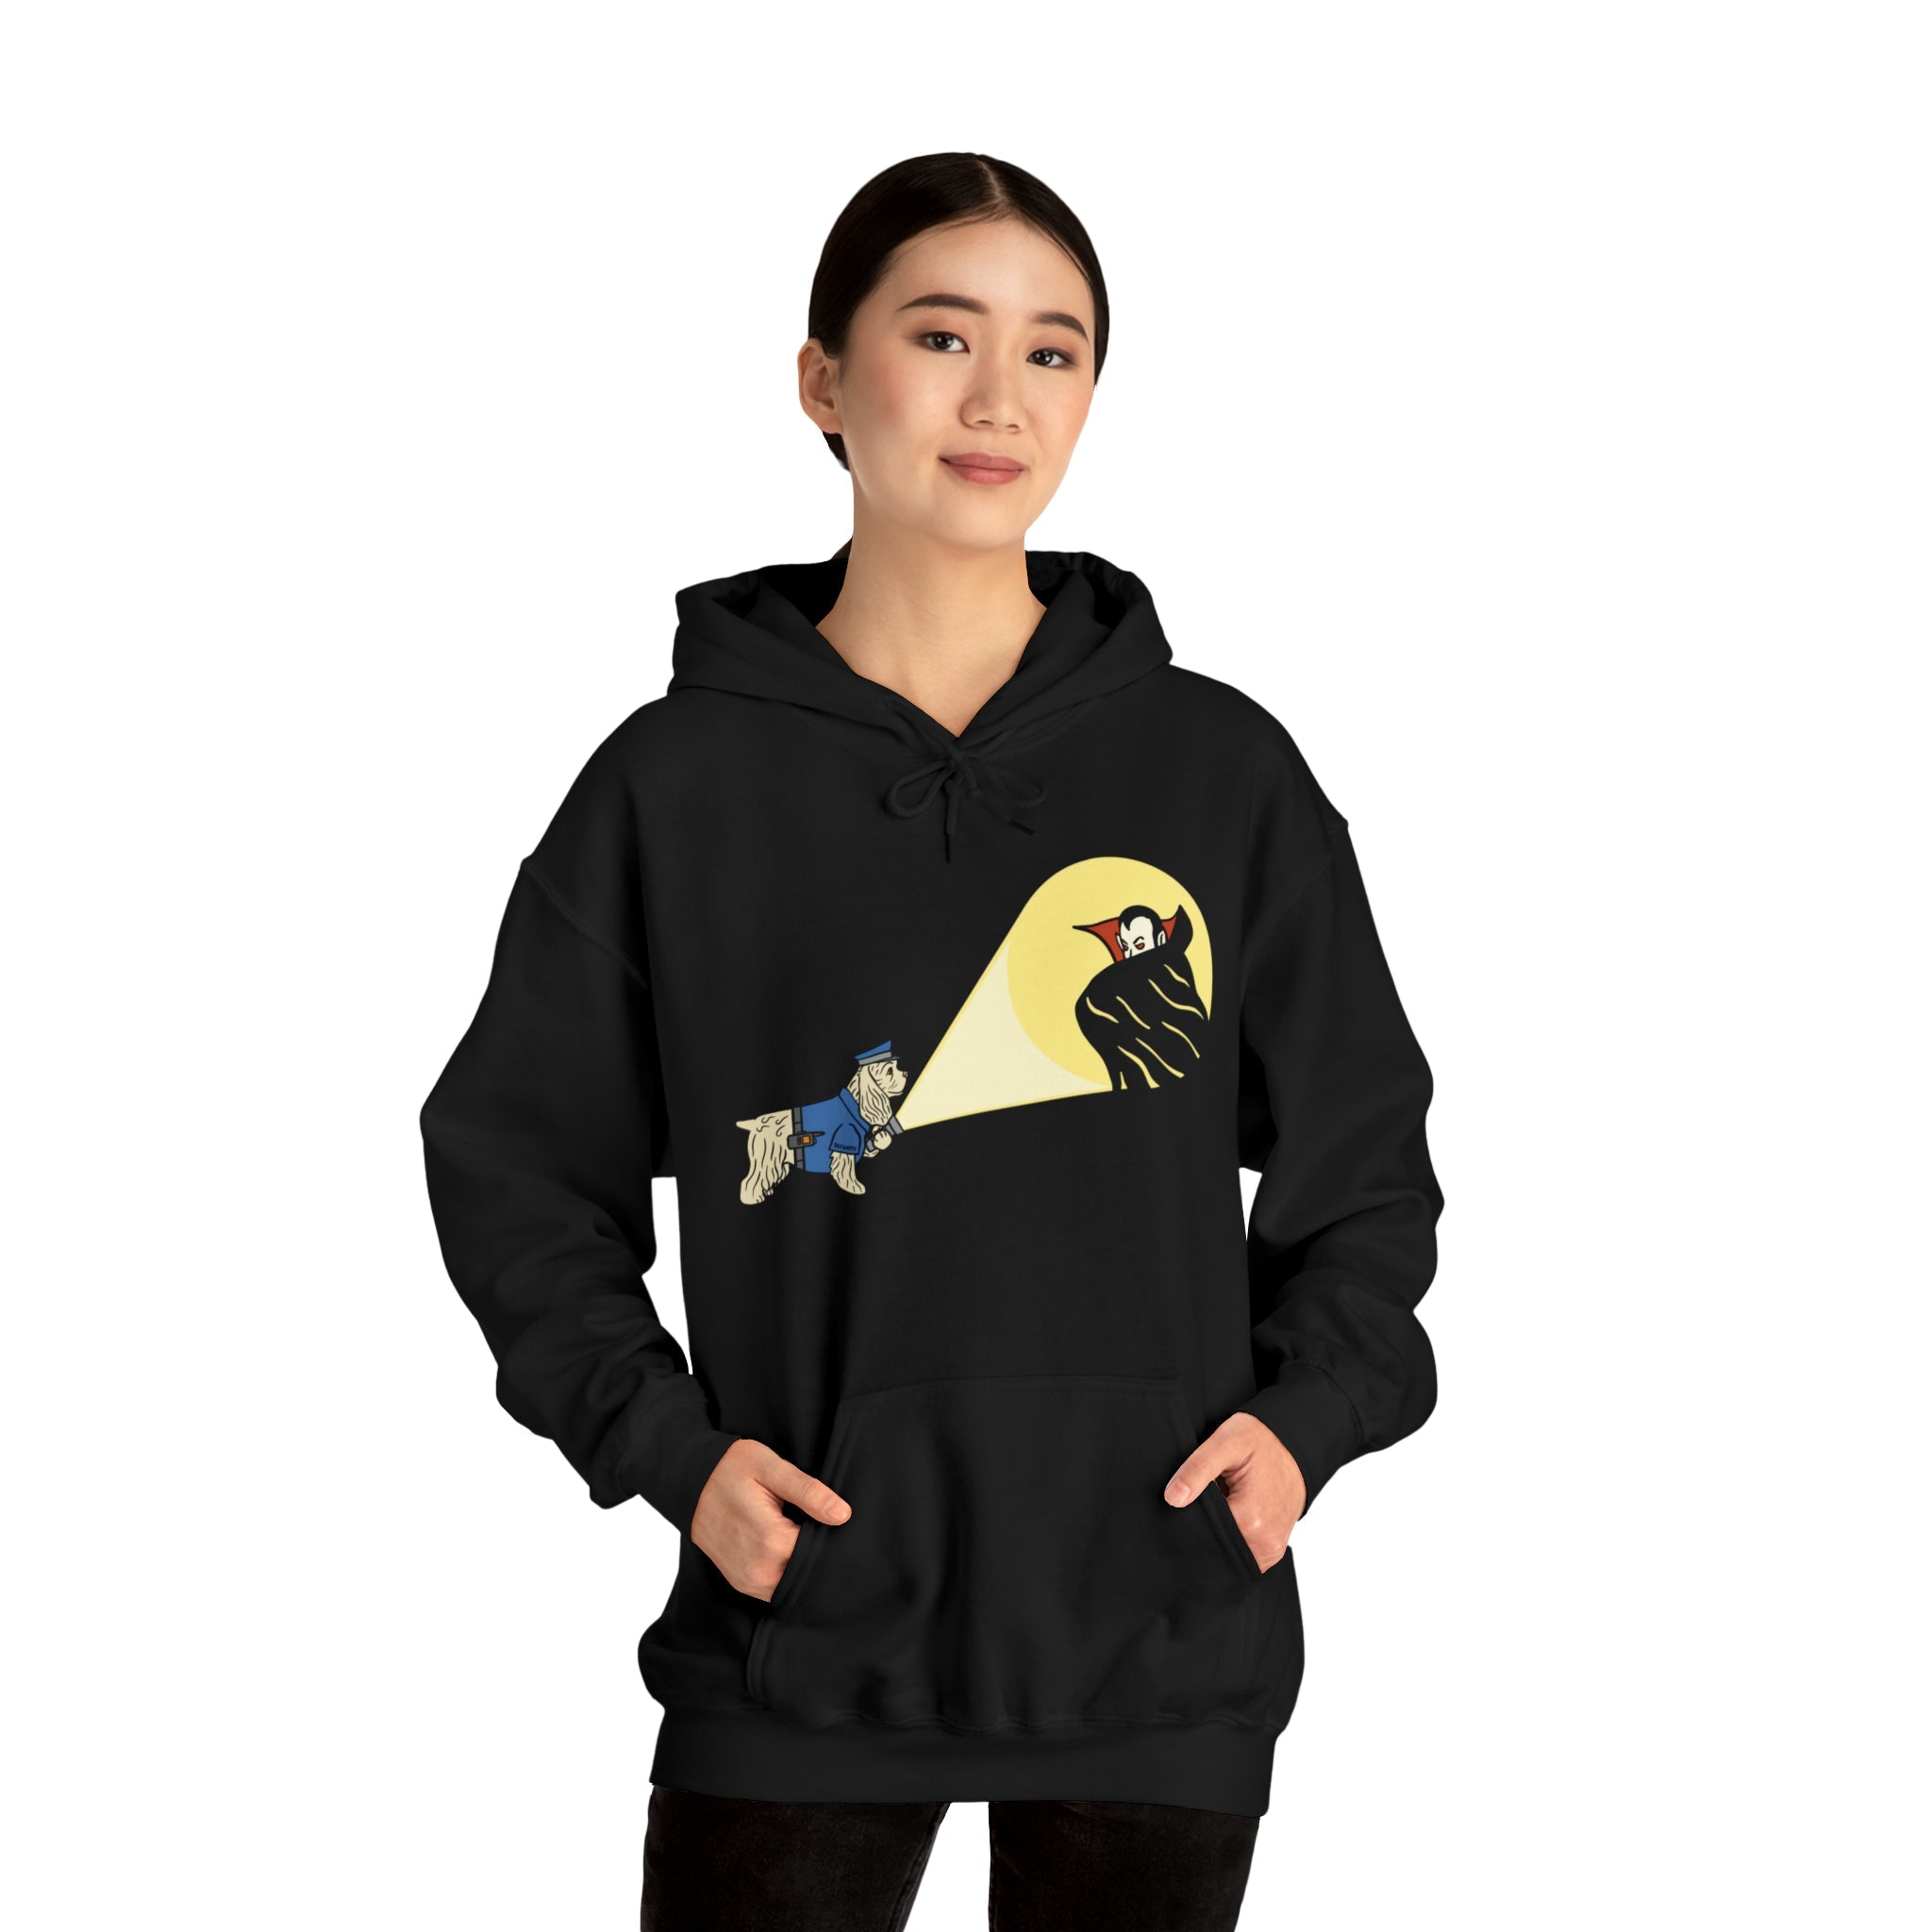 The Night Shift Hoodie - TAILWAGS UNLIMITED